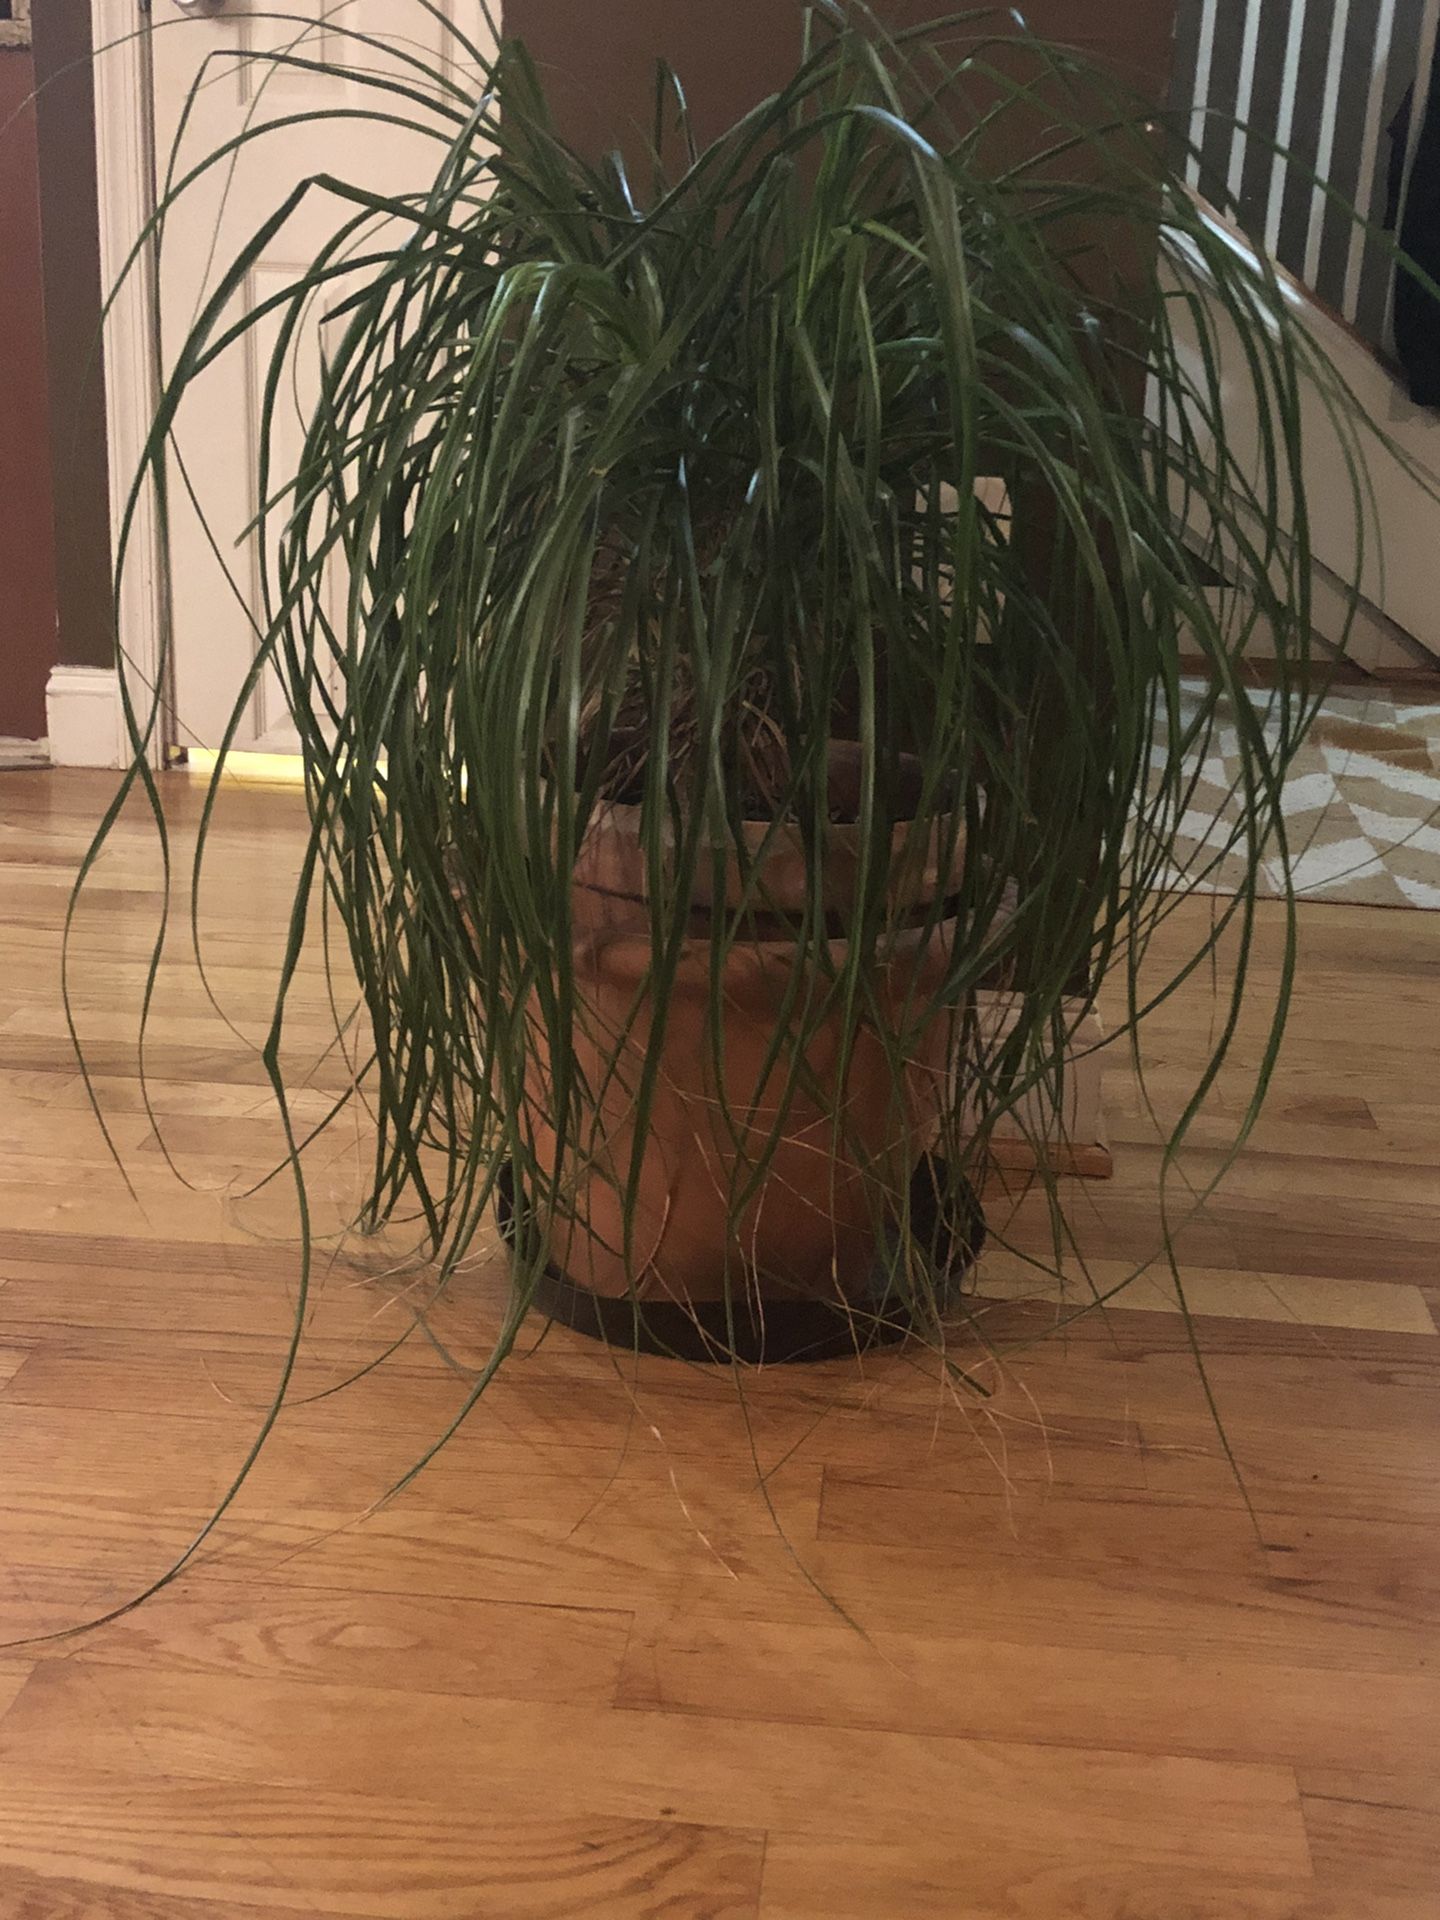 Large ornamental grass plant in pot